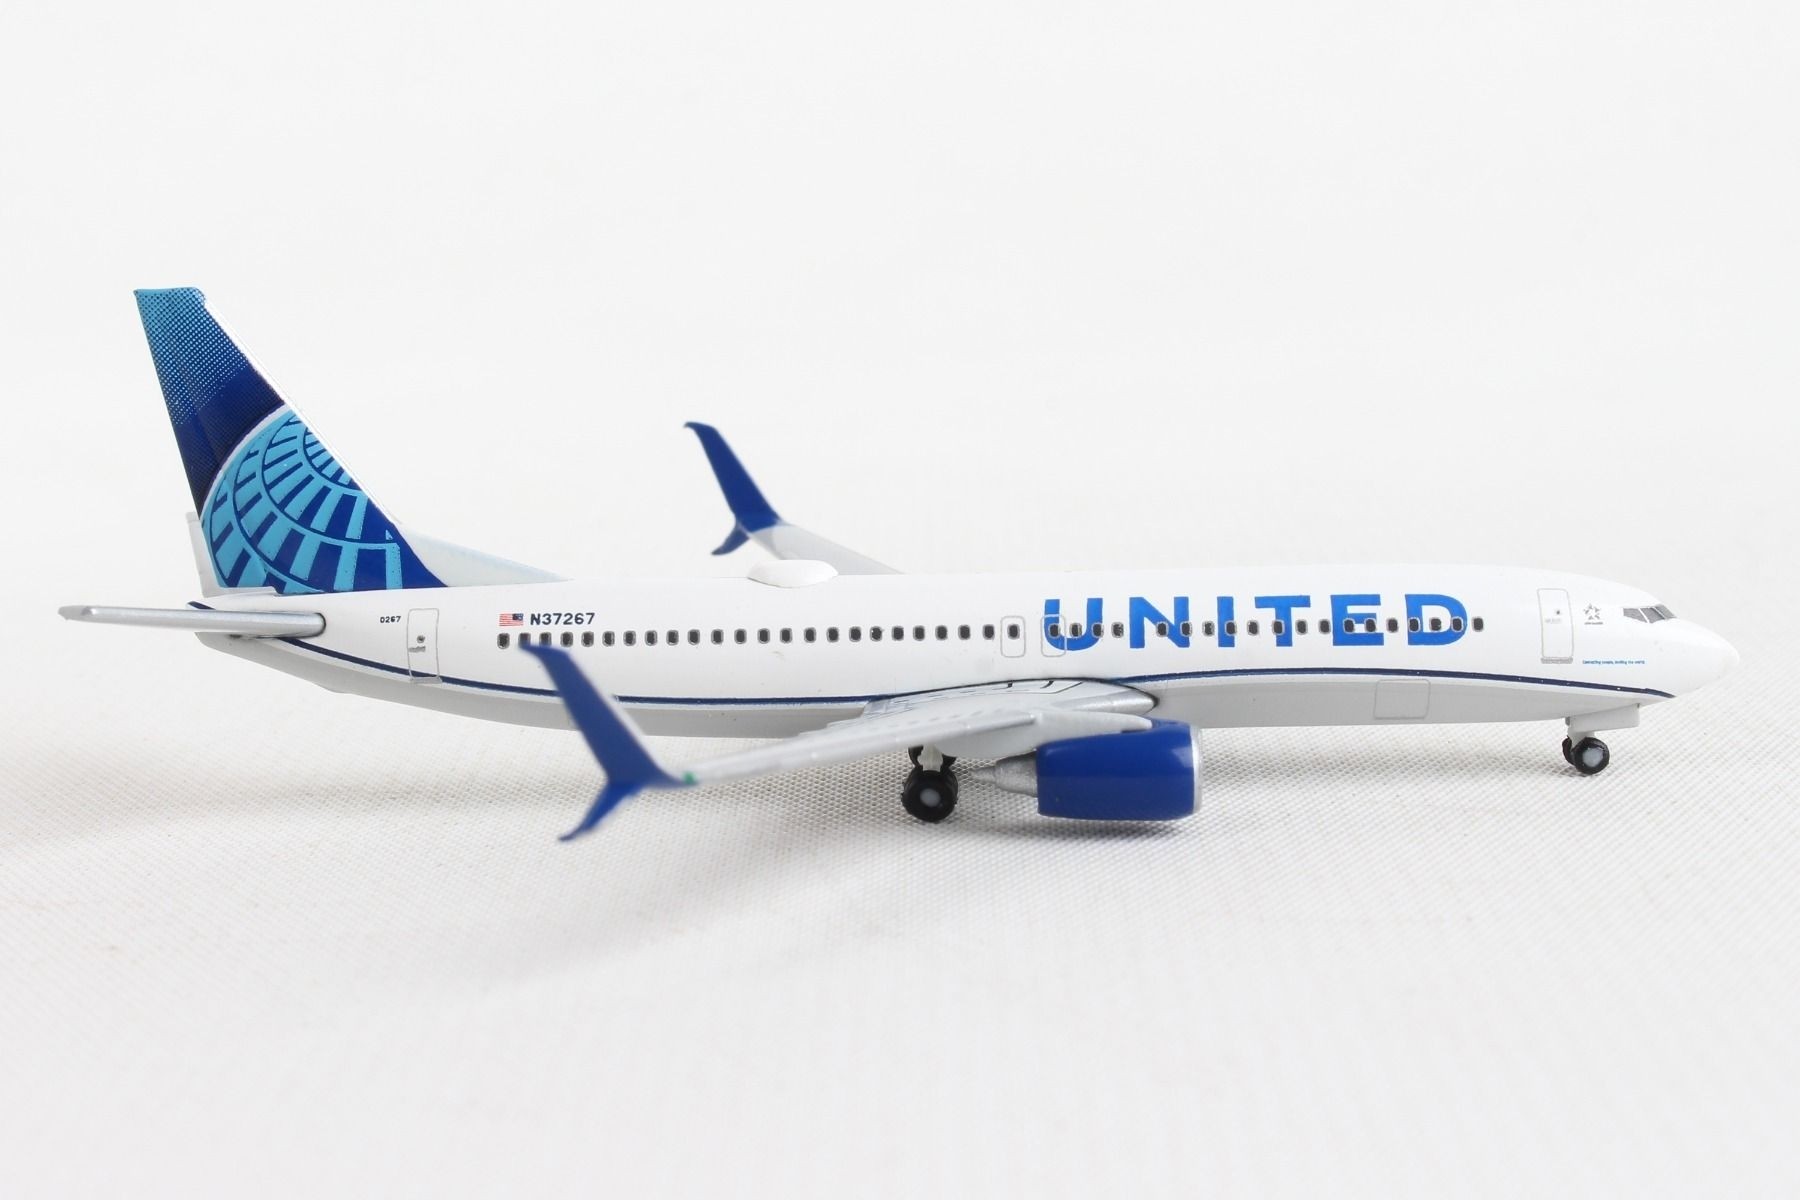 Herpa United Boeing 737-800 1/500 He533744 for sale online 